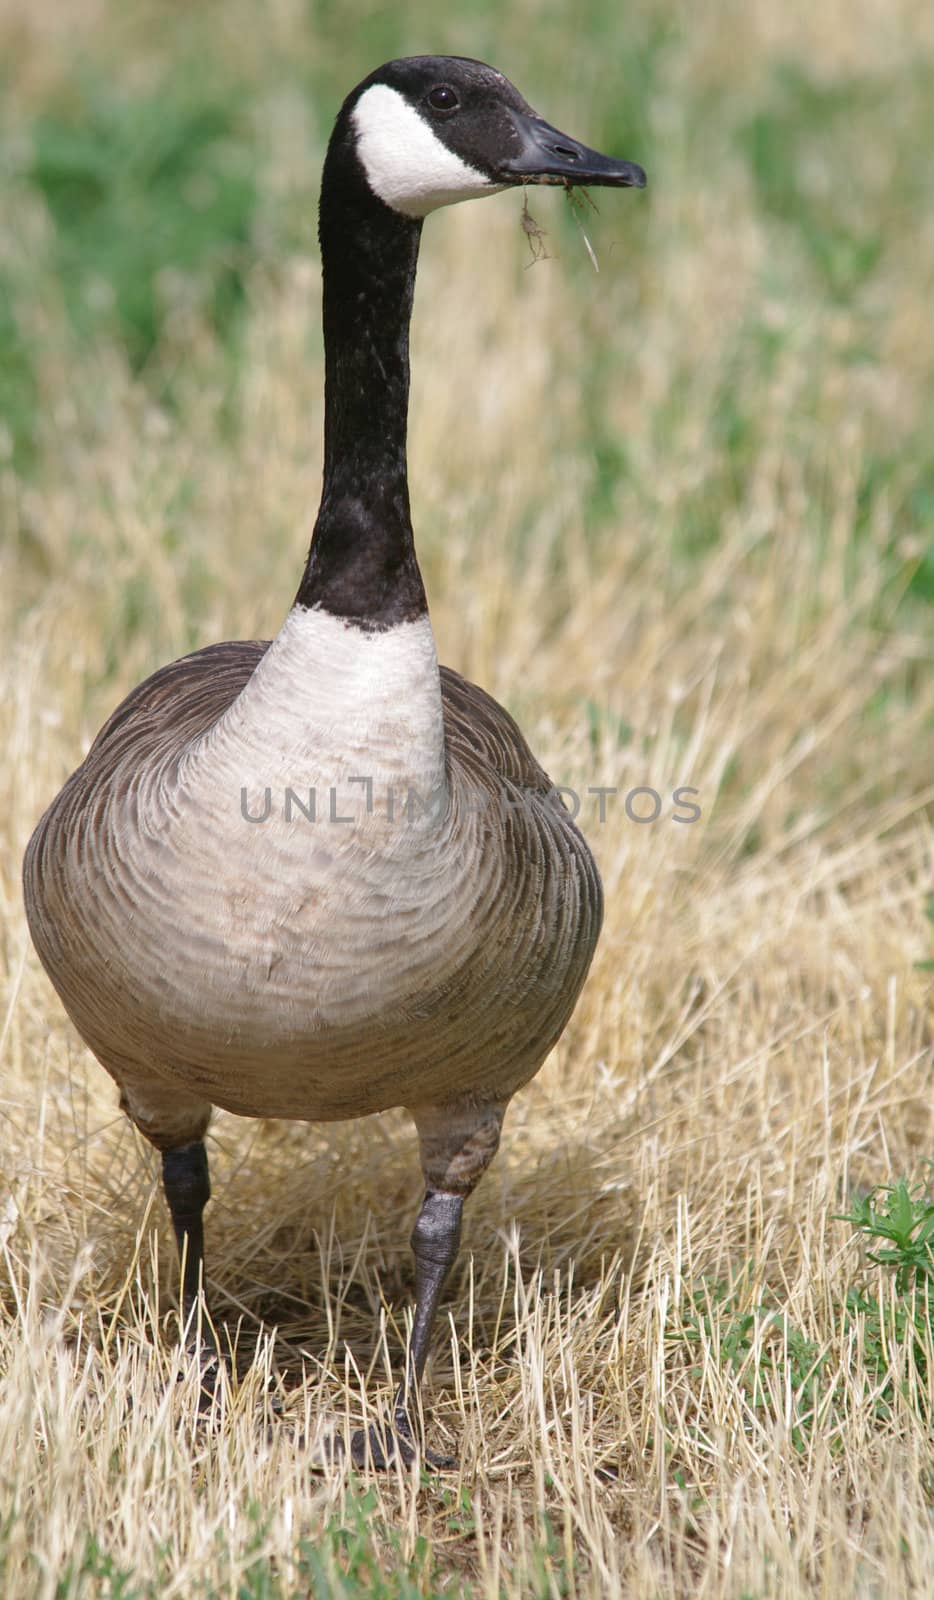 A Canadian Goose walking in short grass and eating